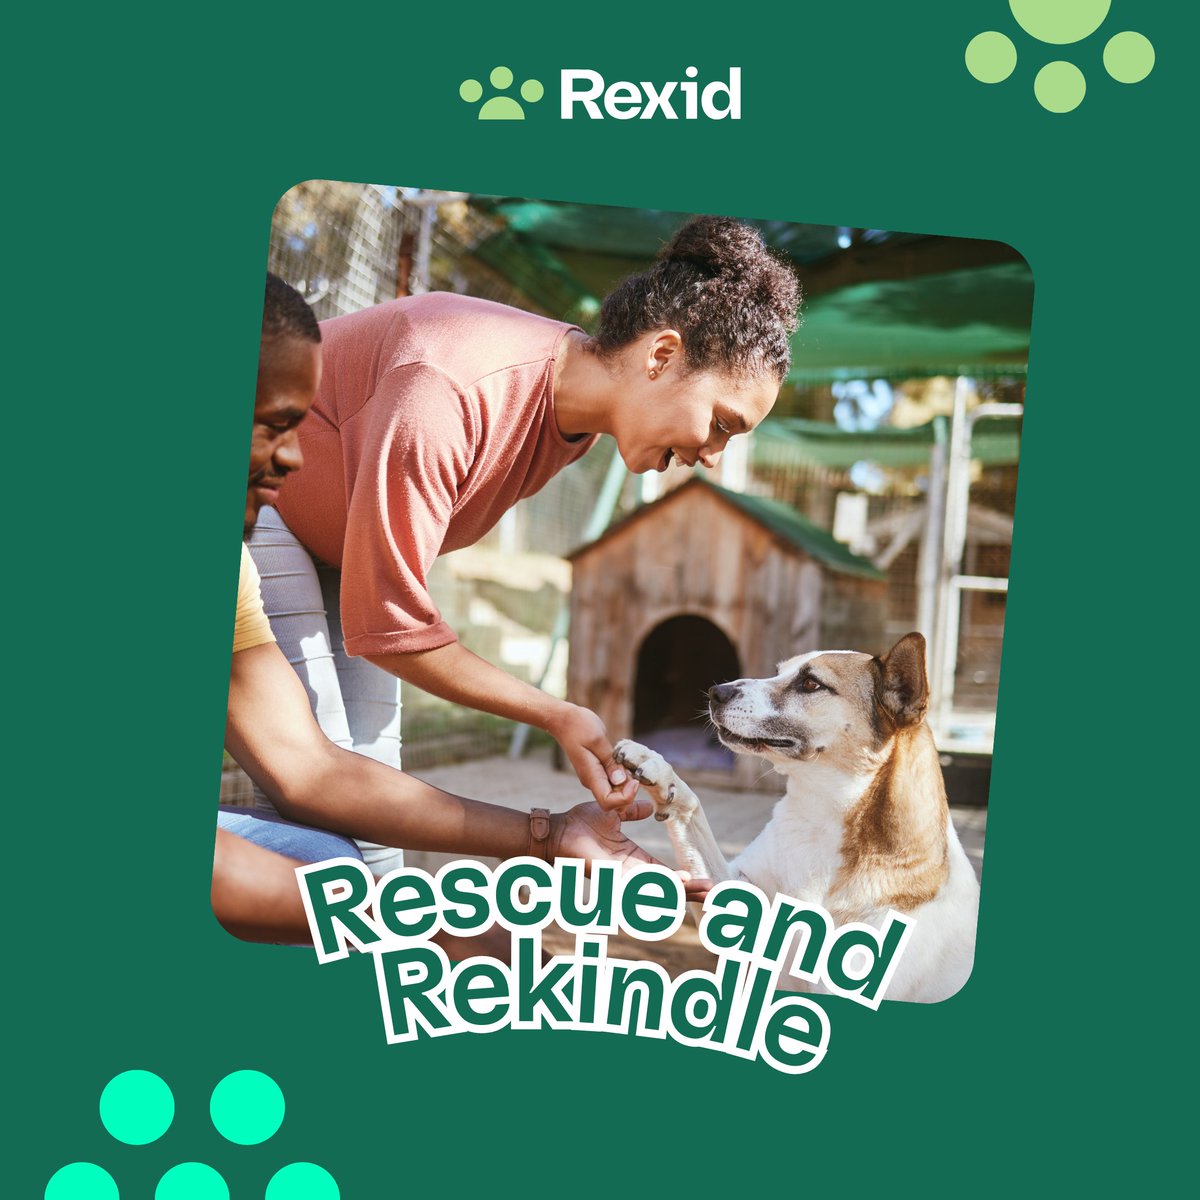 🏠 Every pet deserves a secure life. Ensure your pet's safety with Rexid's top-notch microchips & smart tags. 🐾🔒 #PetSecurity #LostPetRecovery